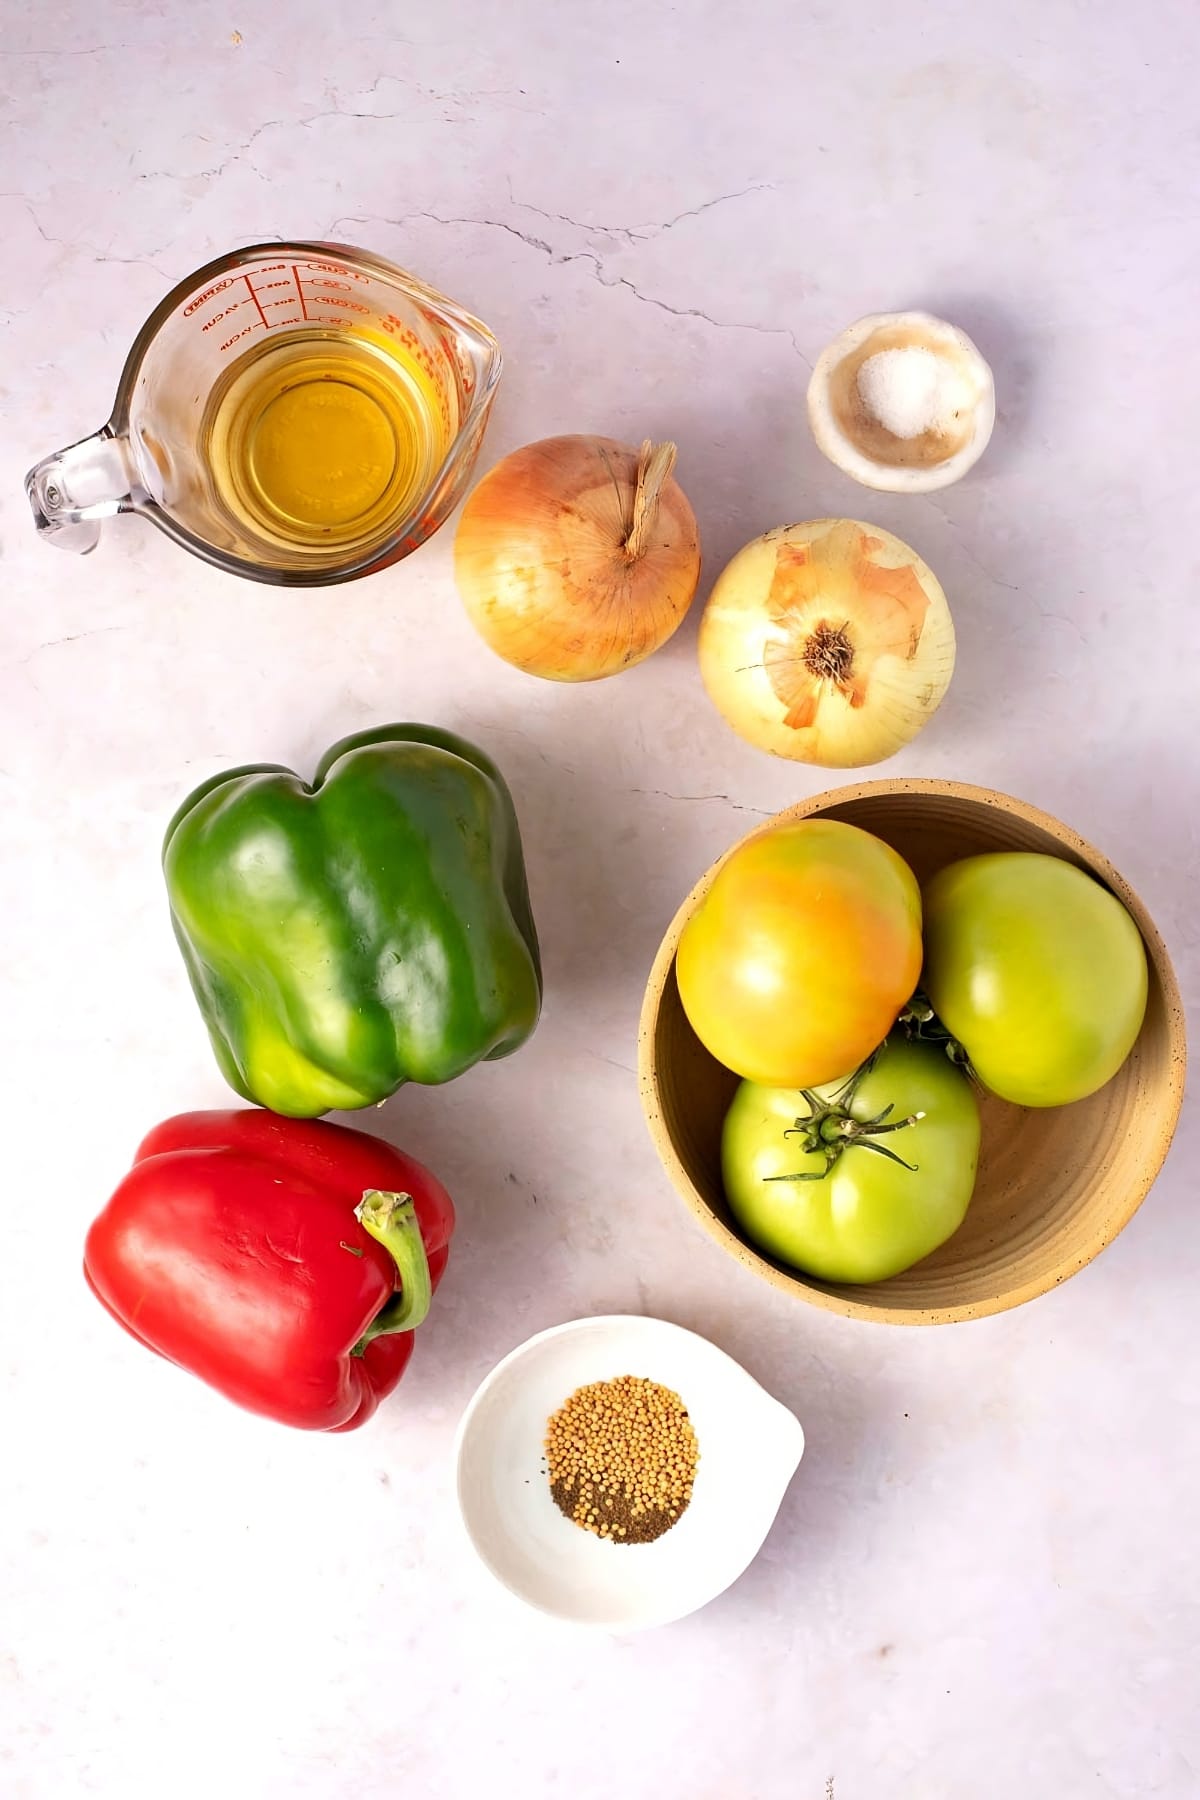 Green Tomato Relish Ingredients - Bell Peppers, Onions, Green Tomatoes, Sugar, Salt, Vinegar, Celery Seed and Mustard Seed